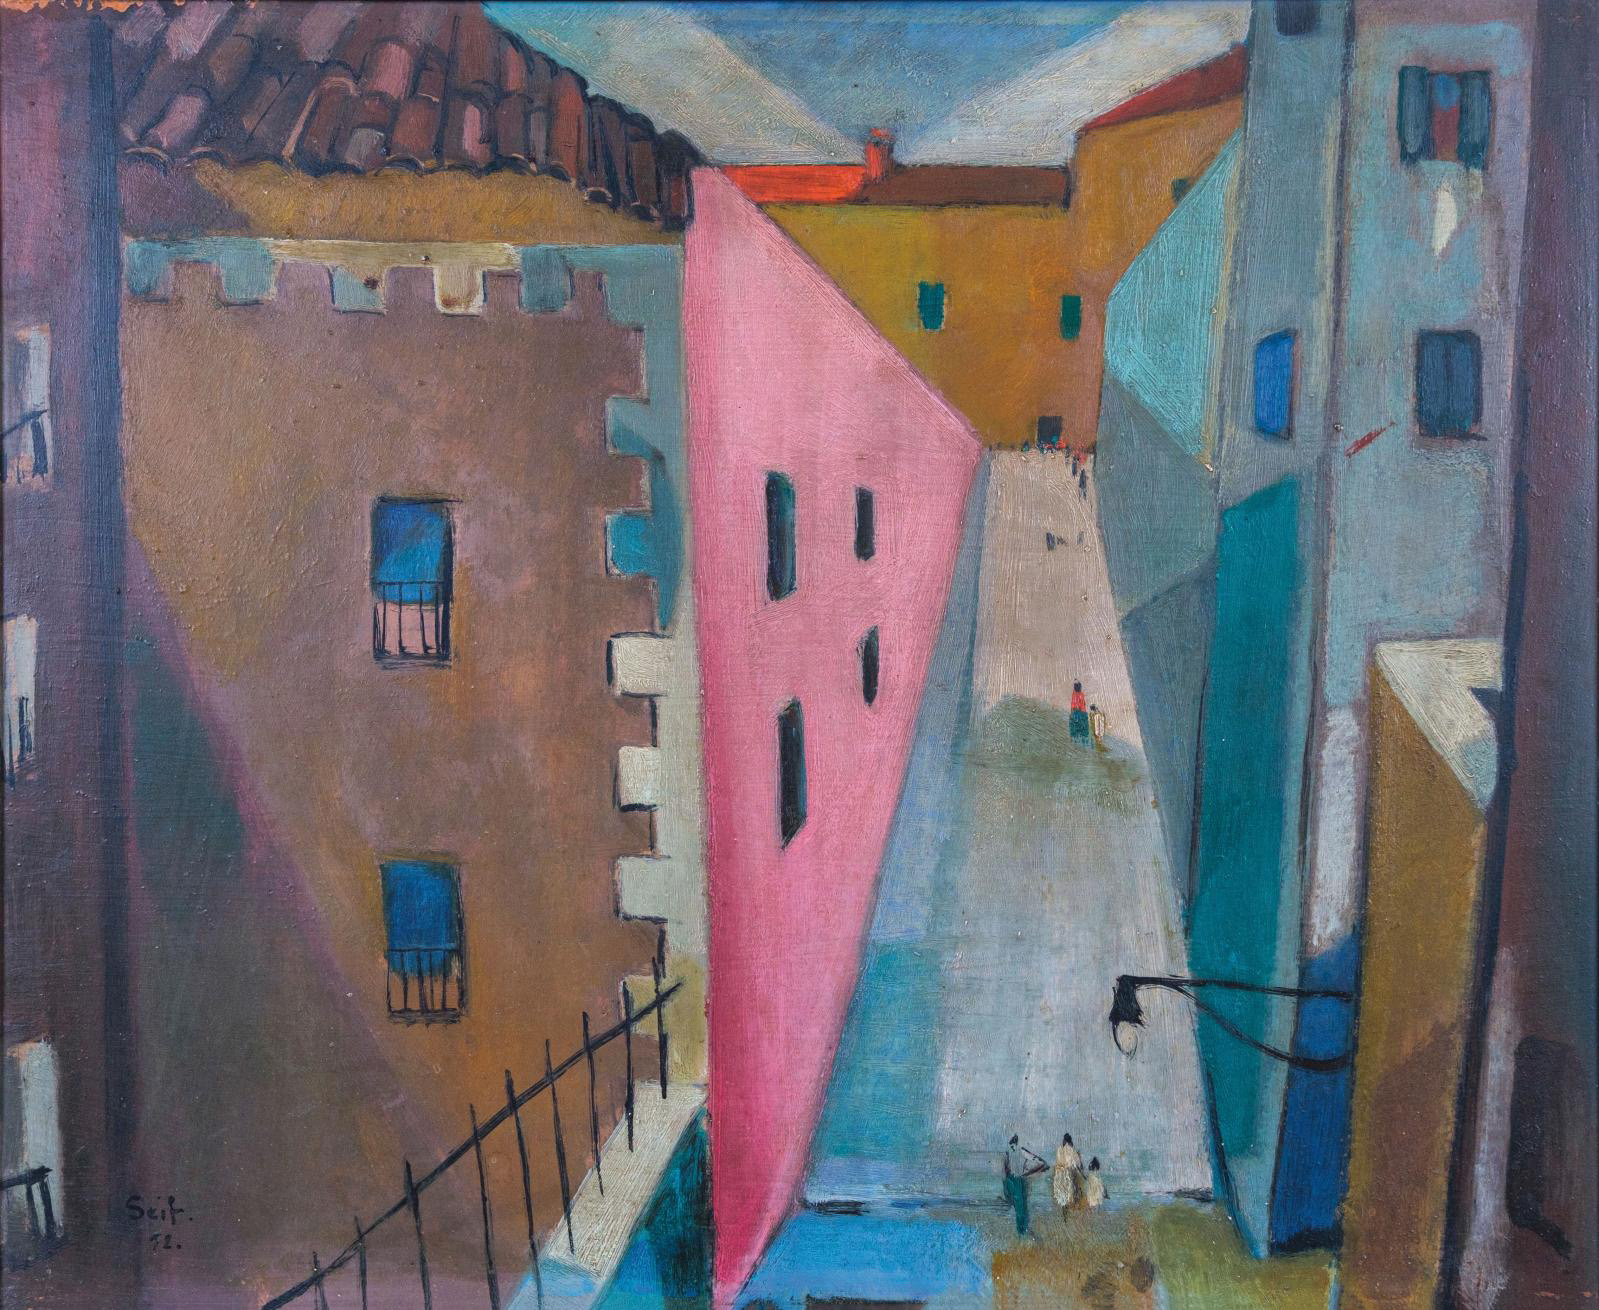 Seif Wanly: An Egyptian Painter in Florence